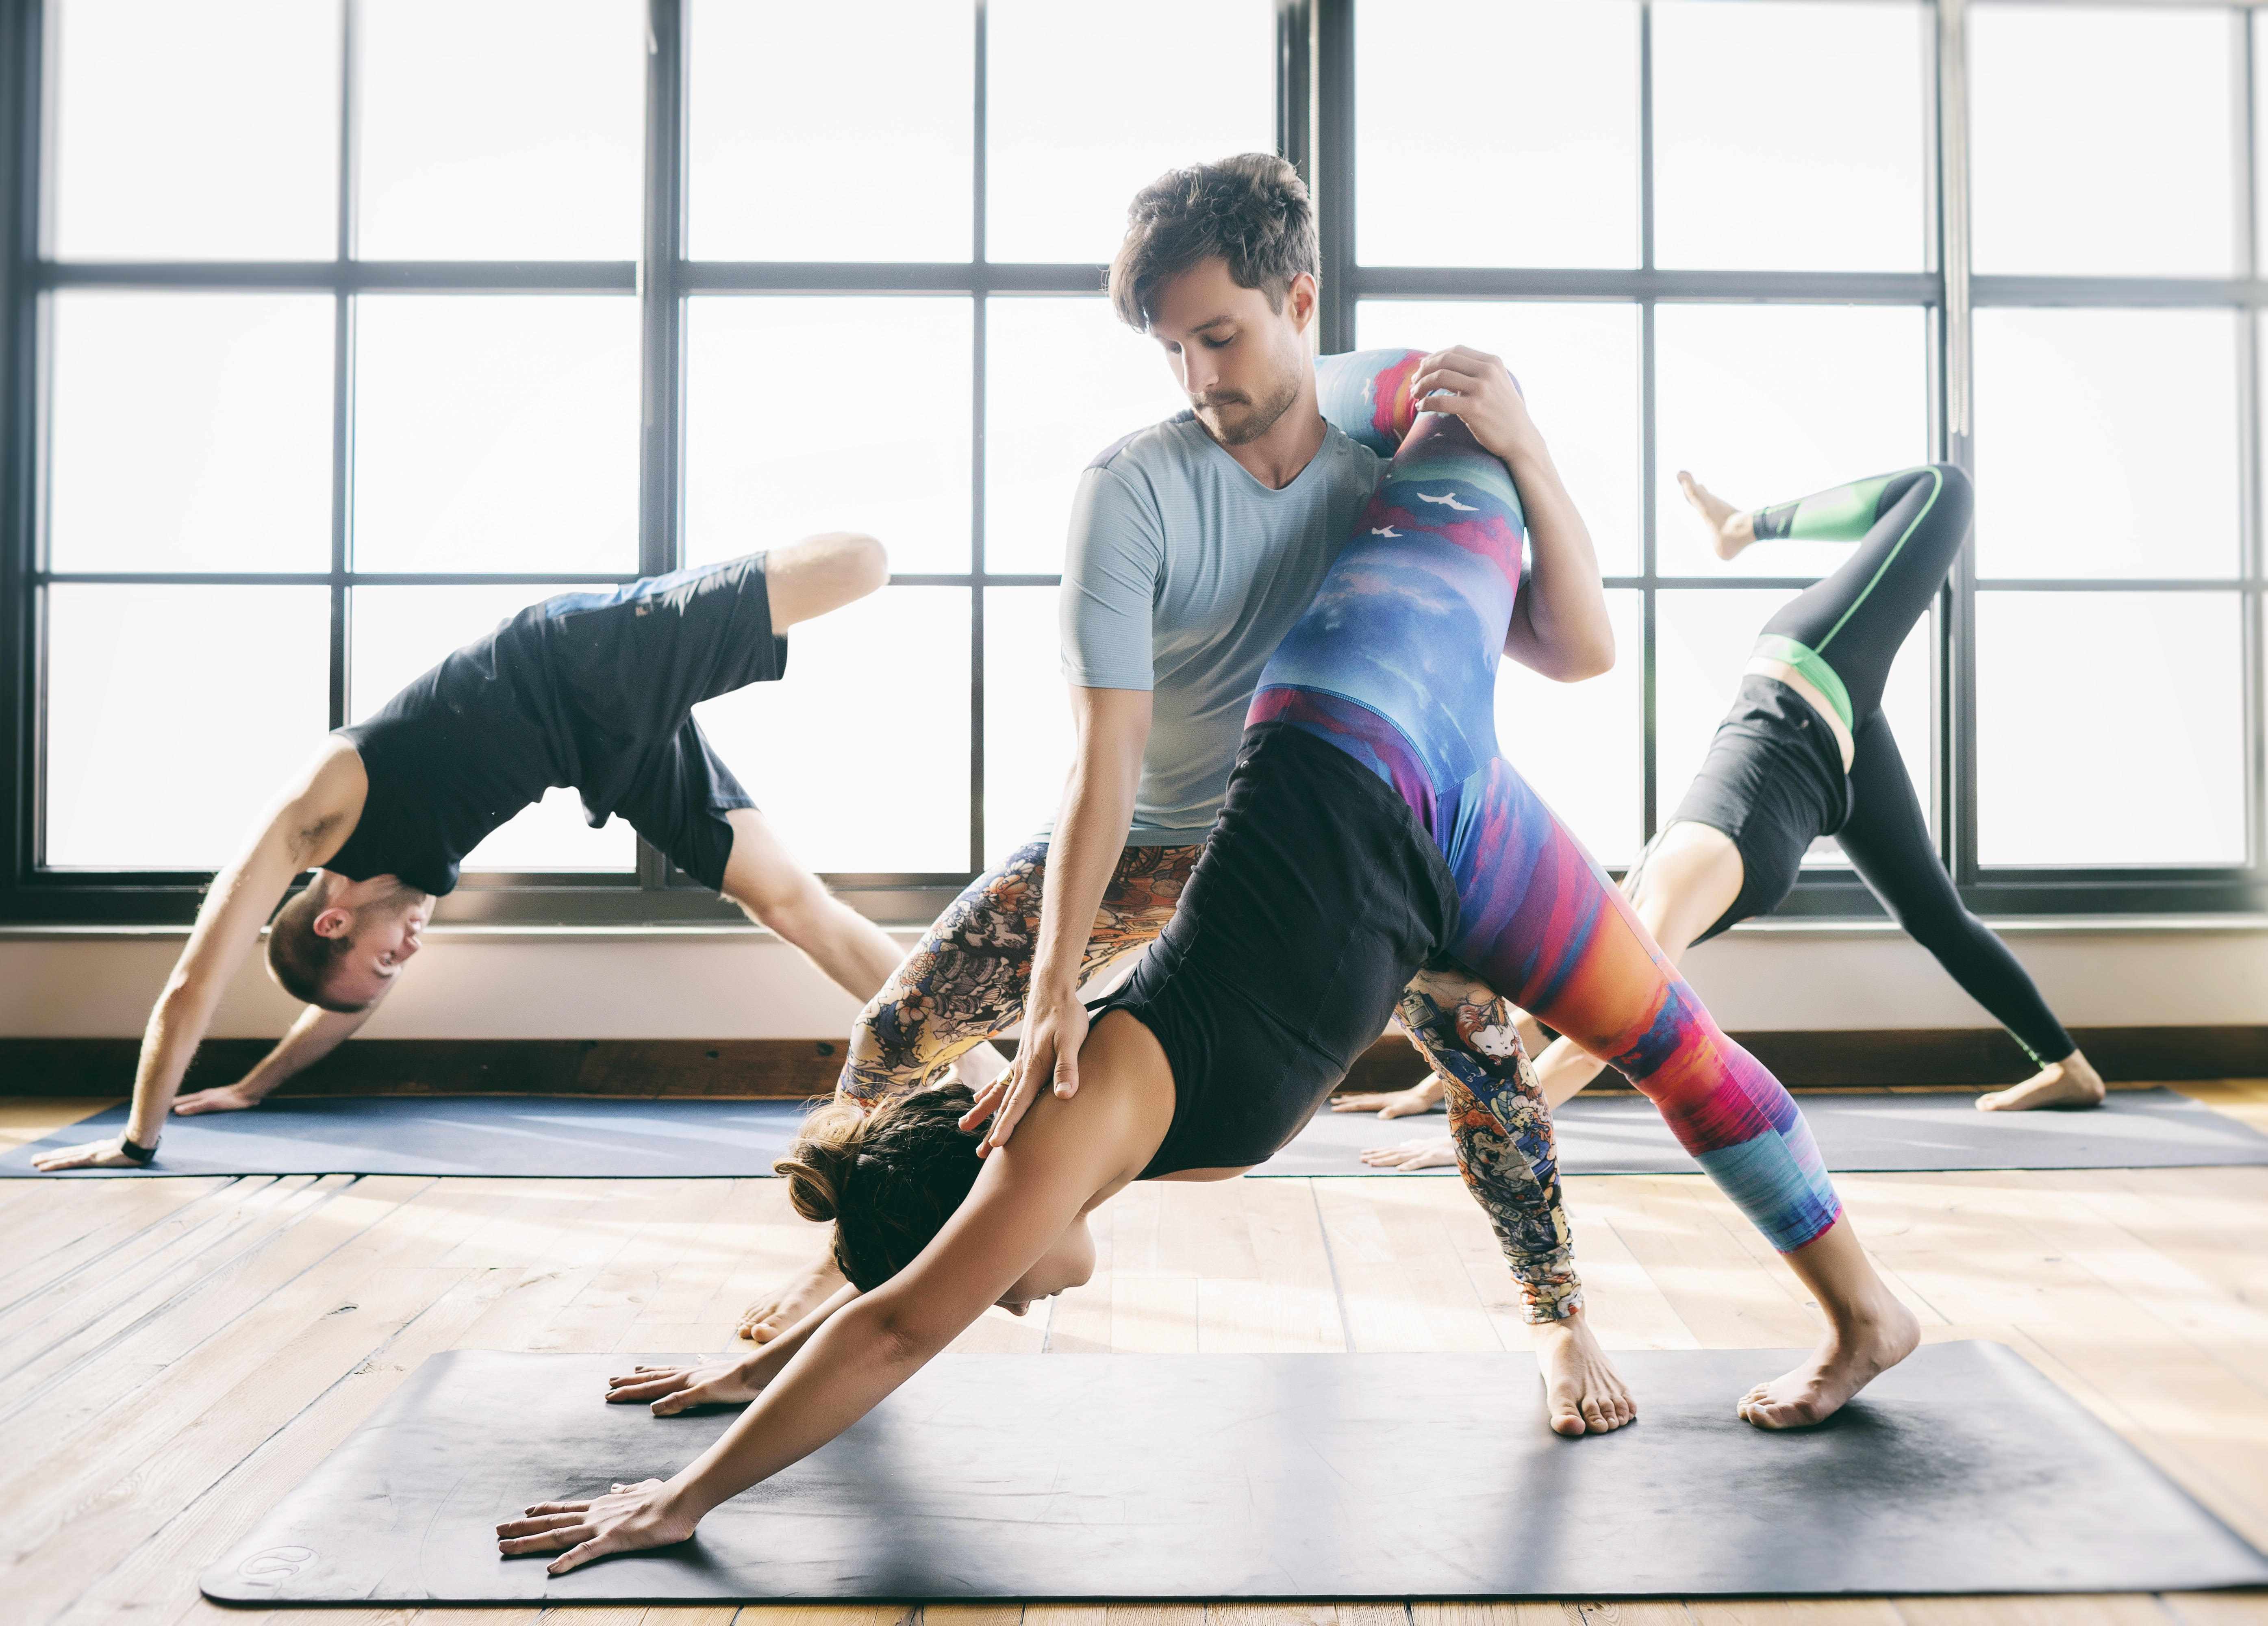 The best job in the world is yoga instructor